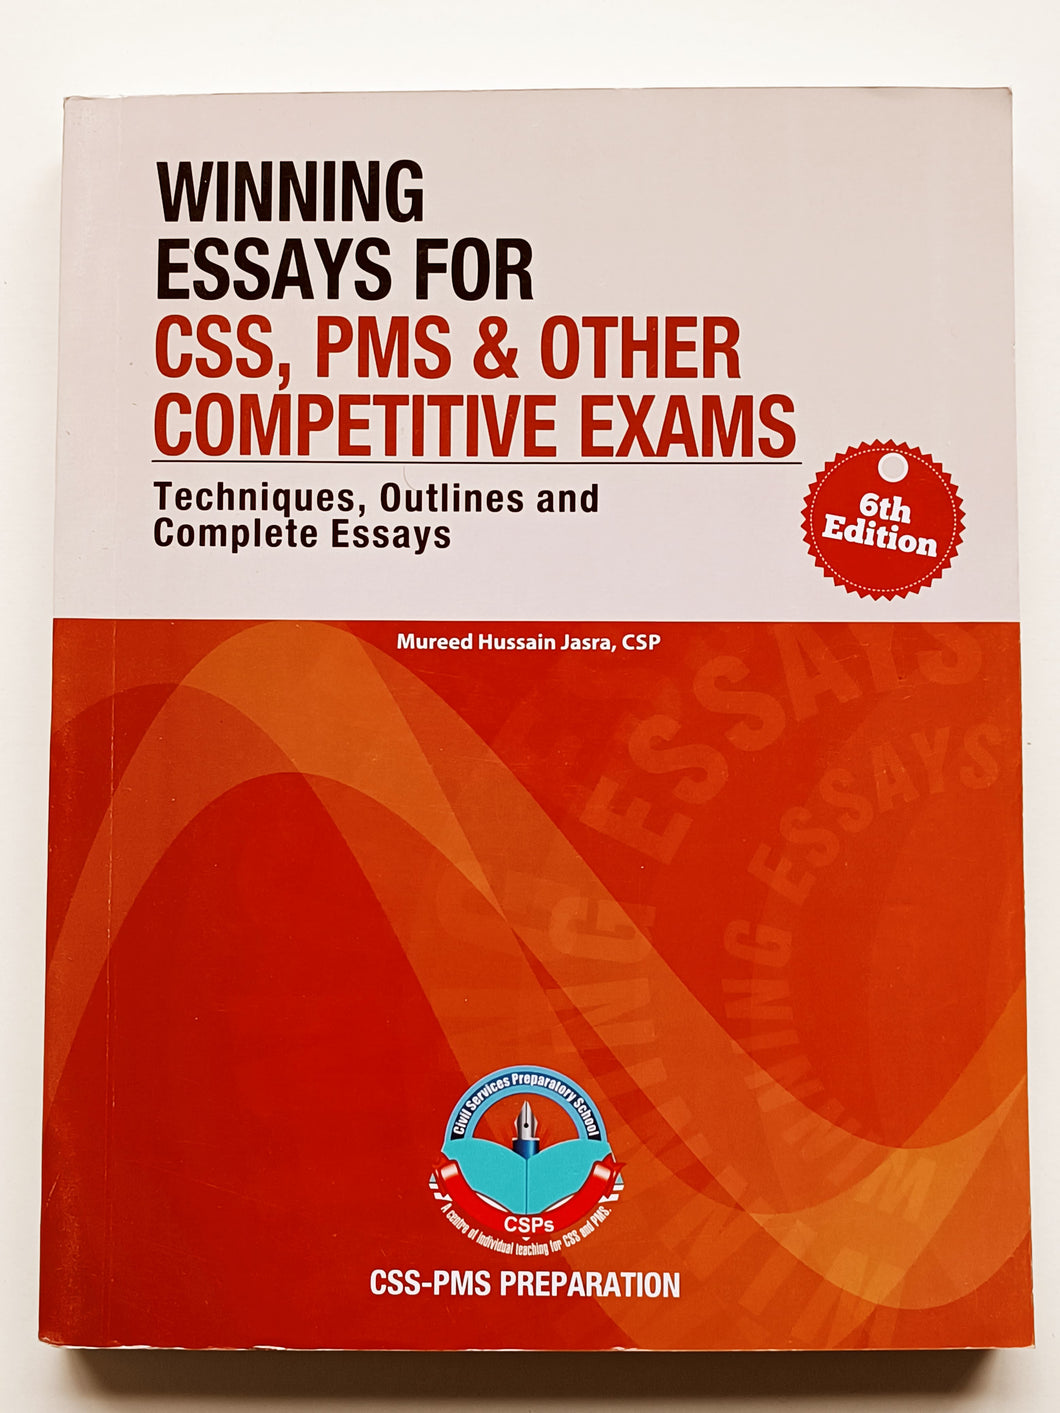 Winning Essays for CSS, PMS and Other Competitive Exams